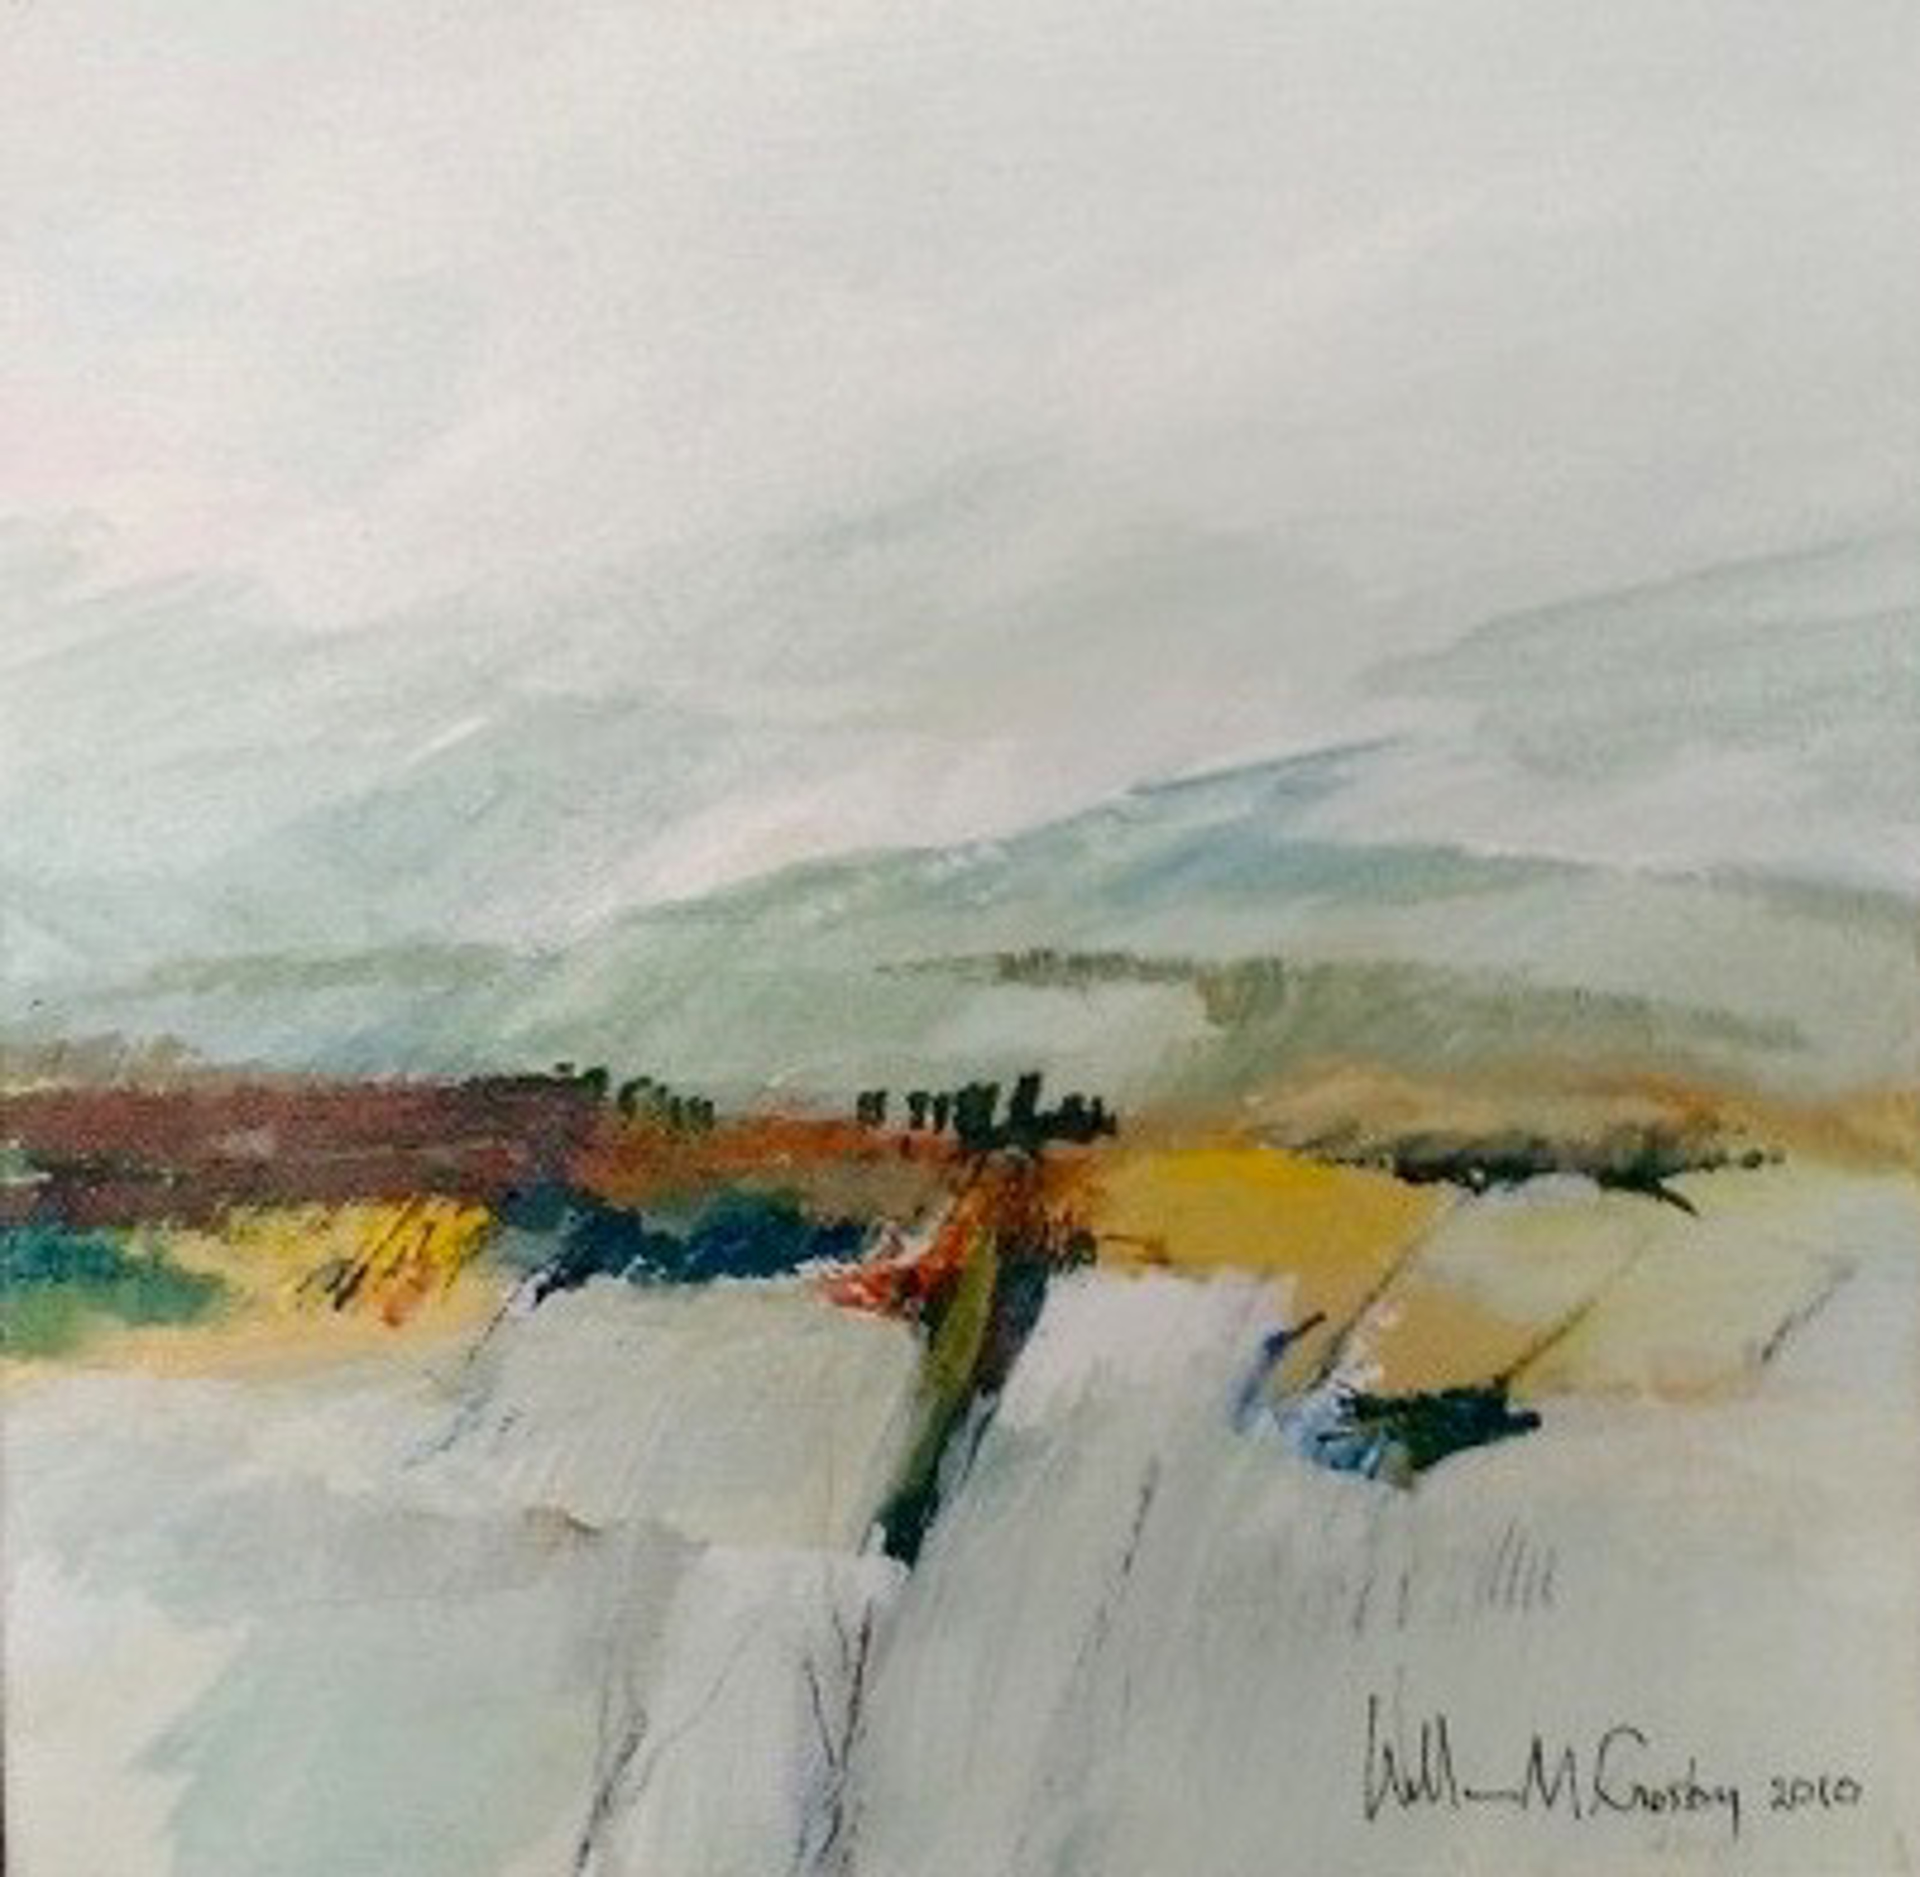 Landscape Gesture #4 by William Crosby - Small Works